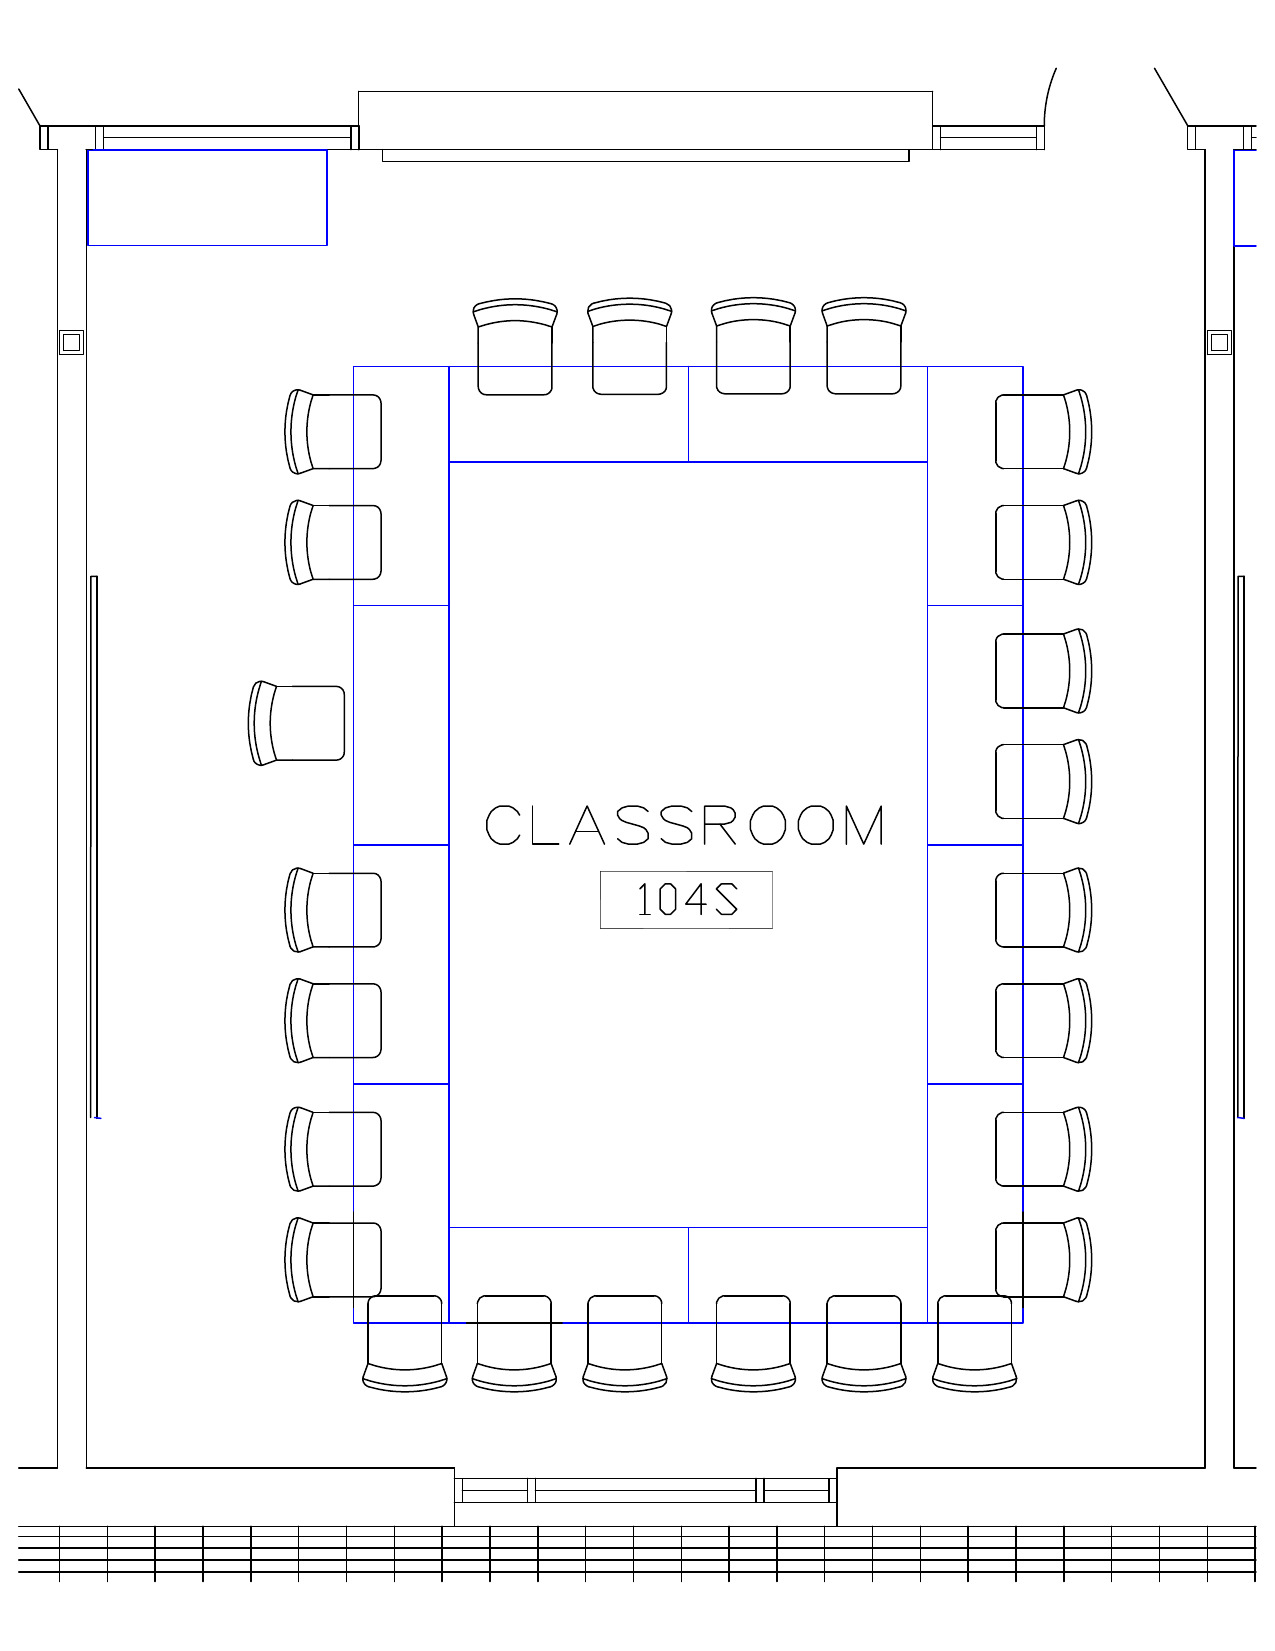 Seating chart of Roberts South 104